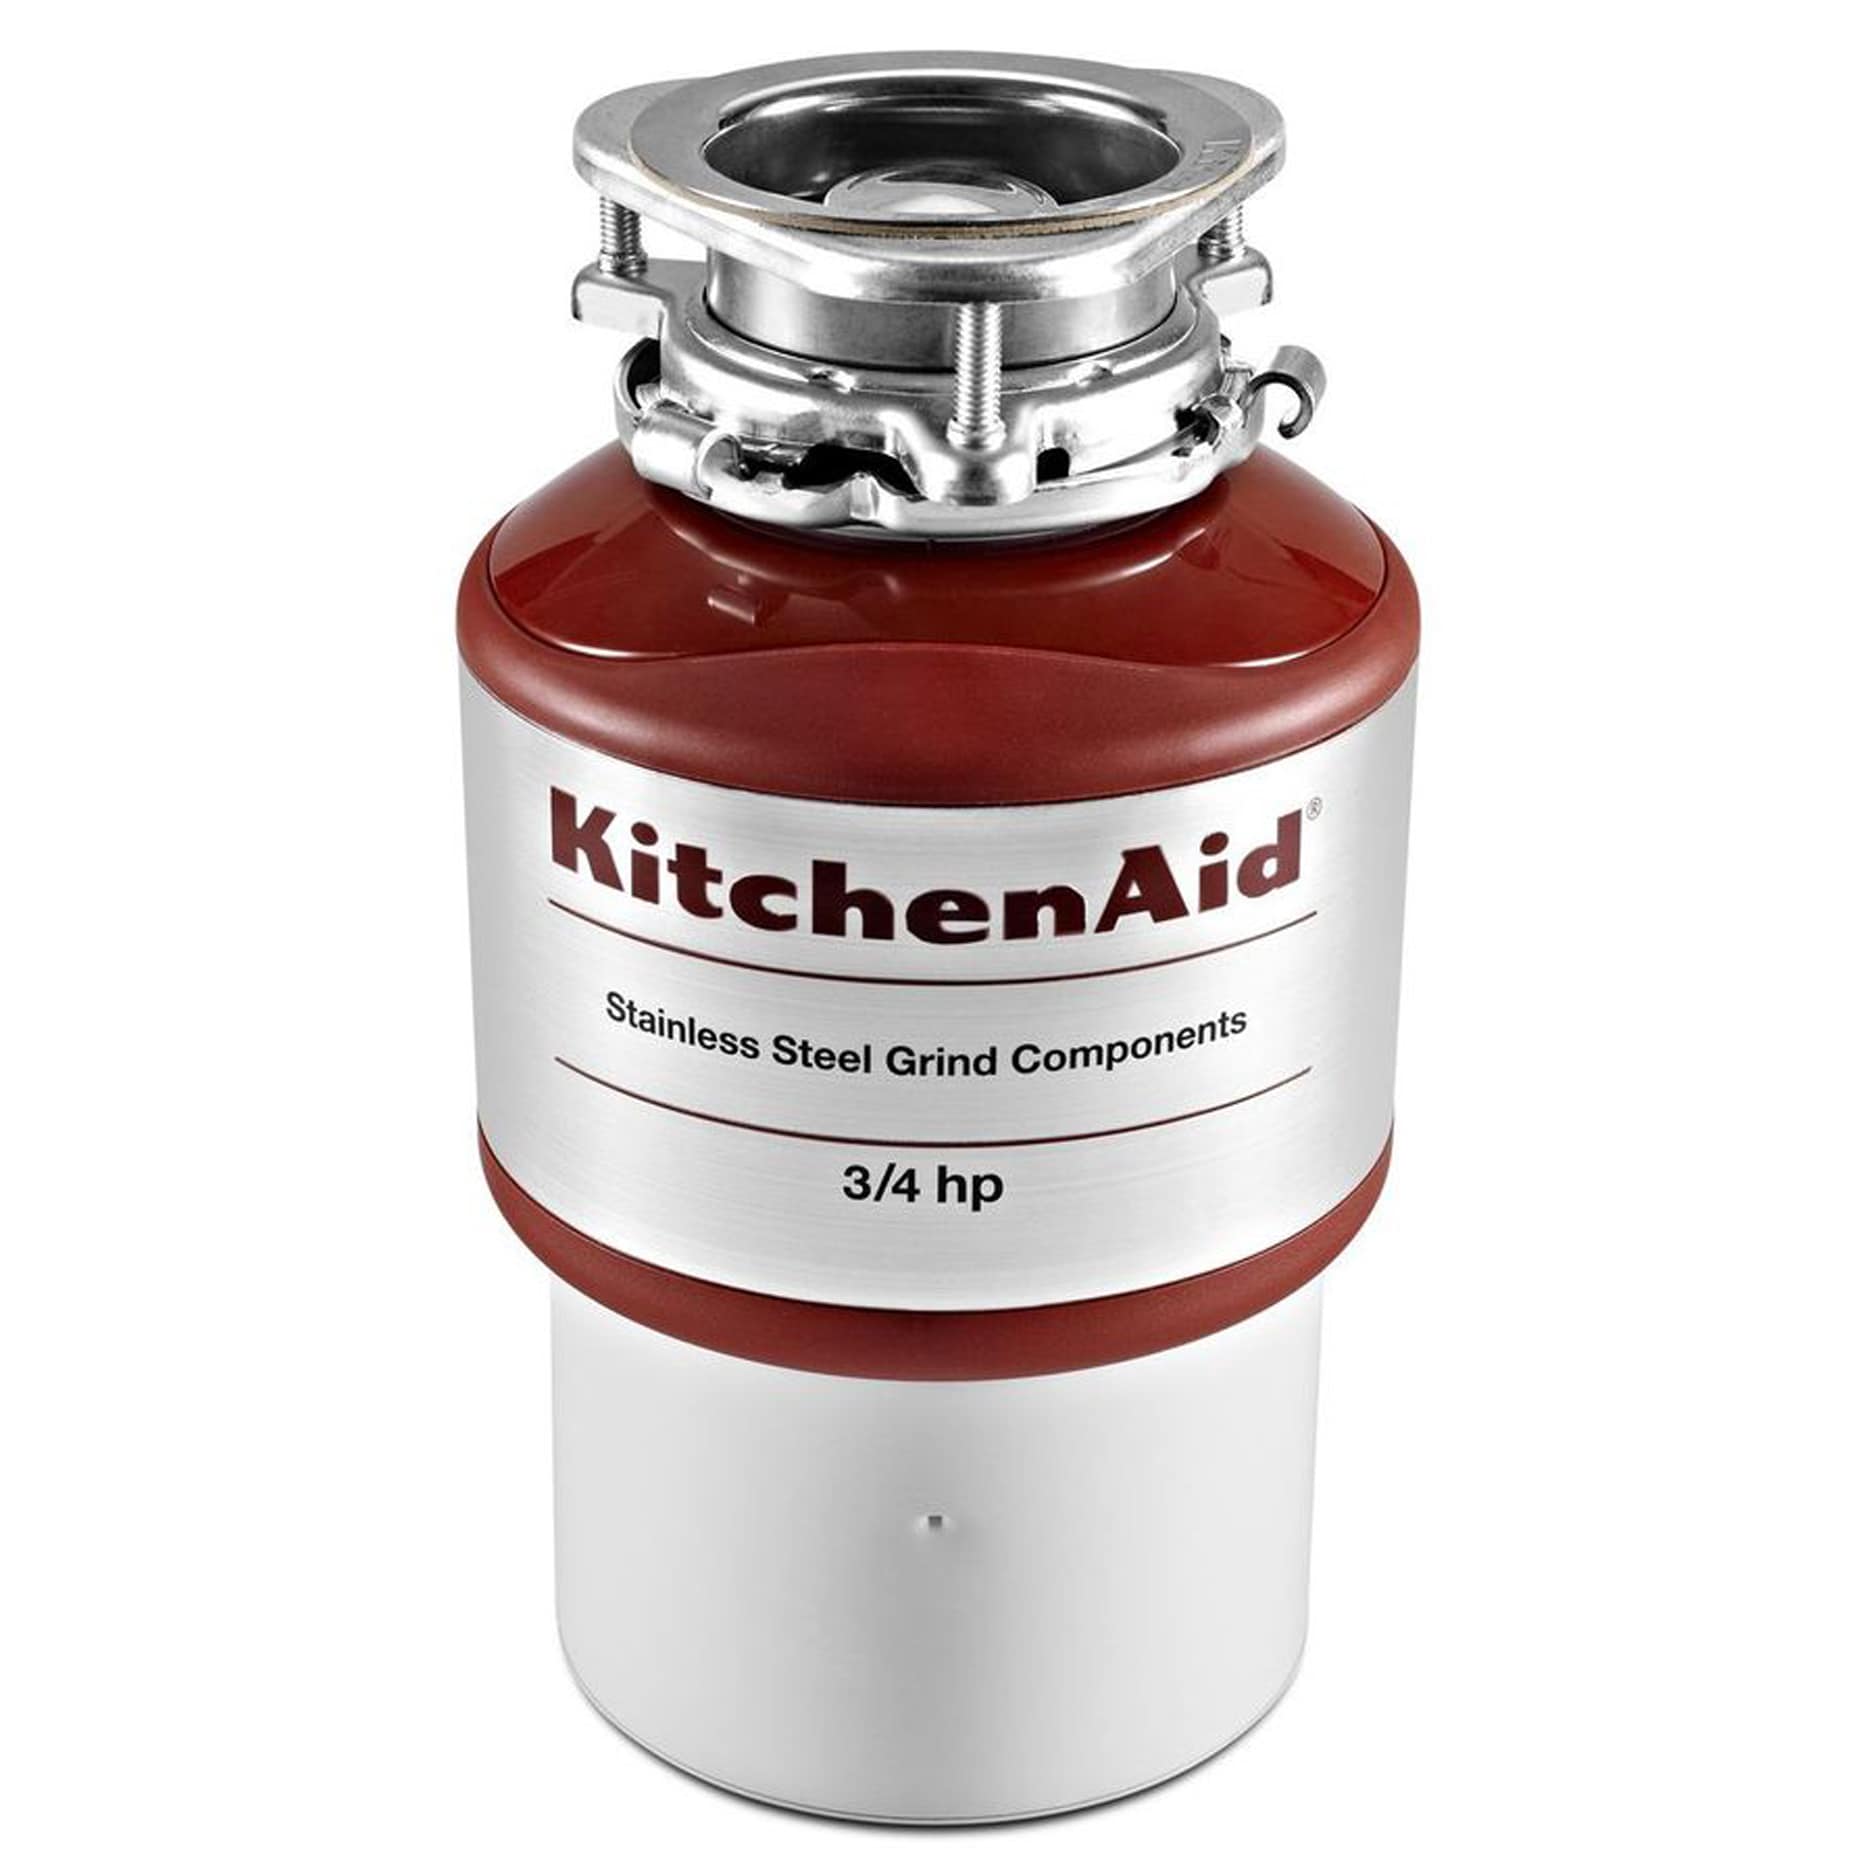 KitchenAid® 0.5 HP Continuous Feed Stainless Steel Food Waste